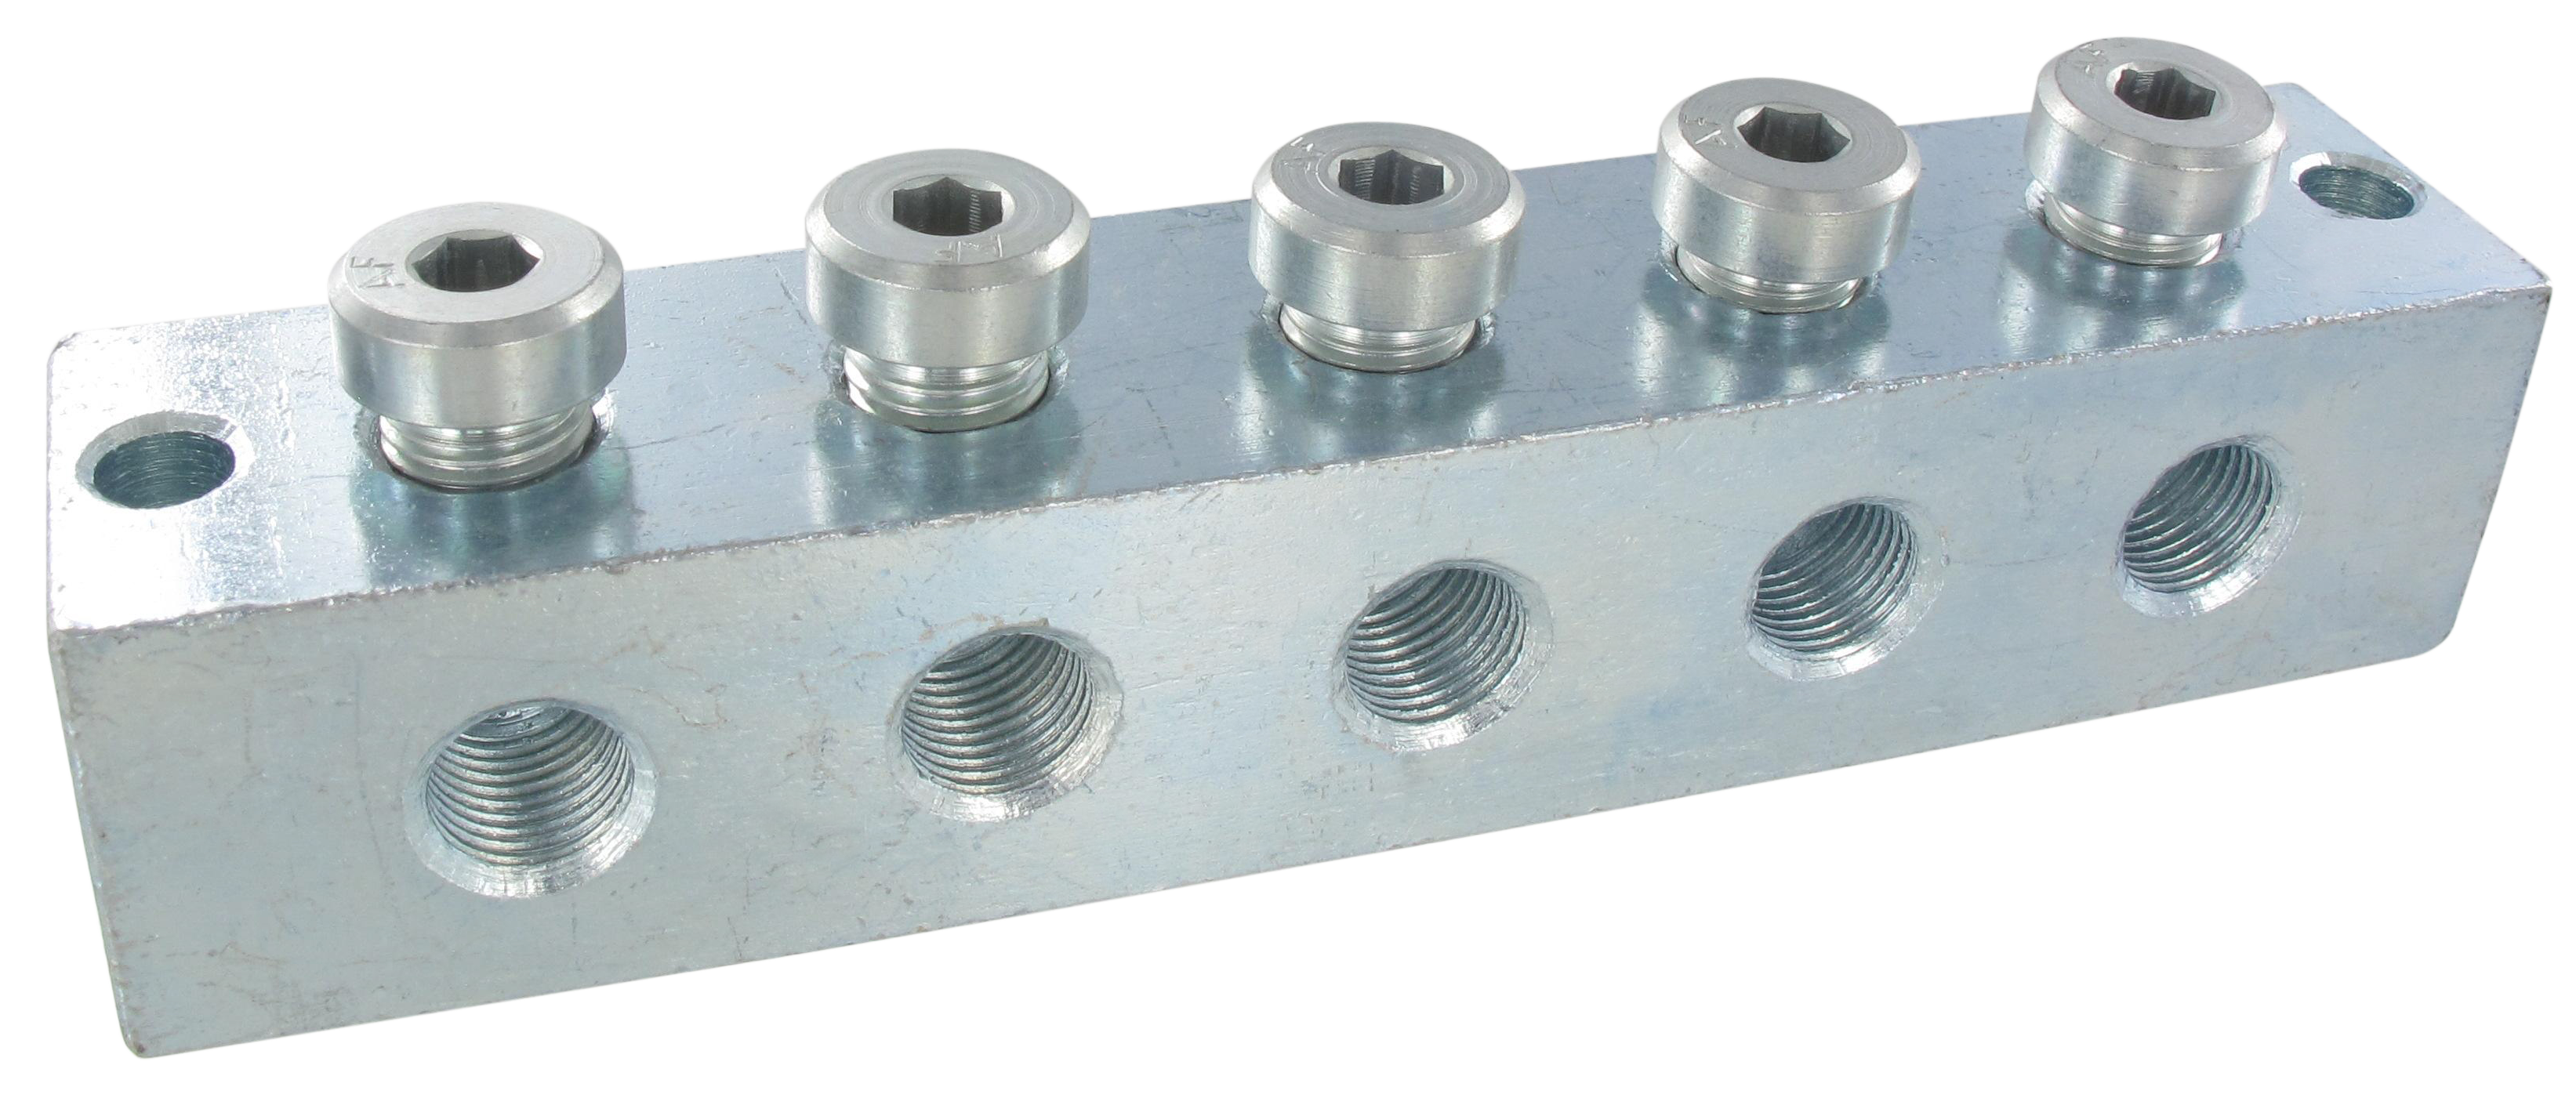 Threaded T-connector manifold M10x1 with 3 connections in galvanised steel Standard fittings for lubrication